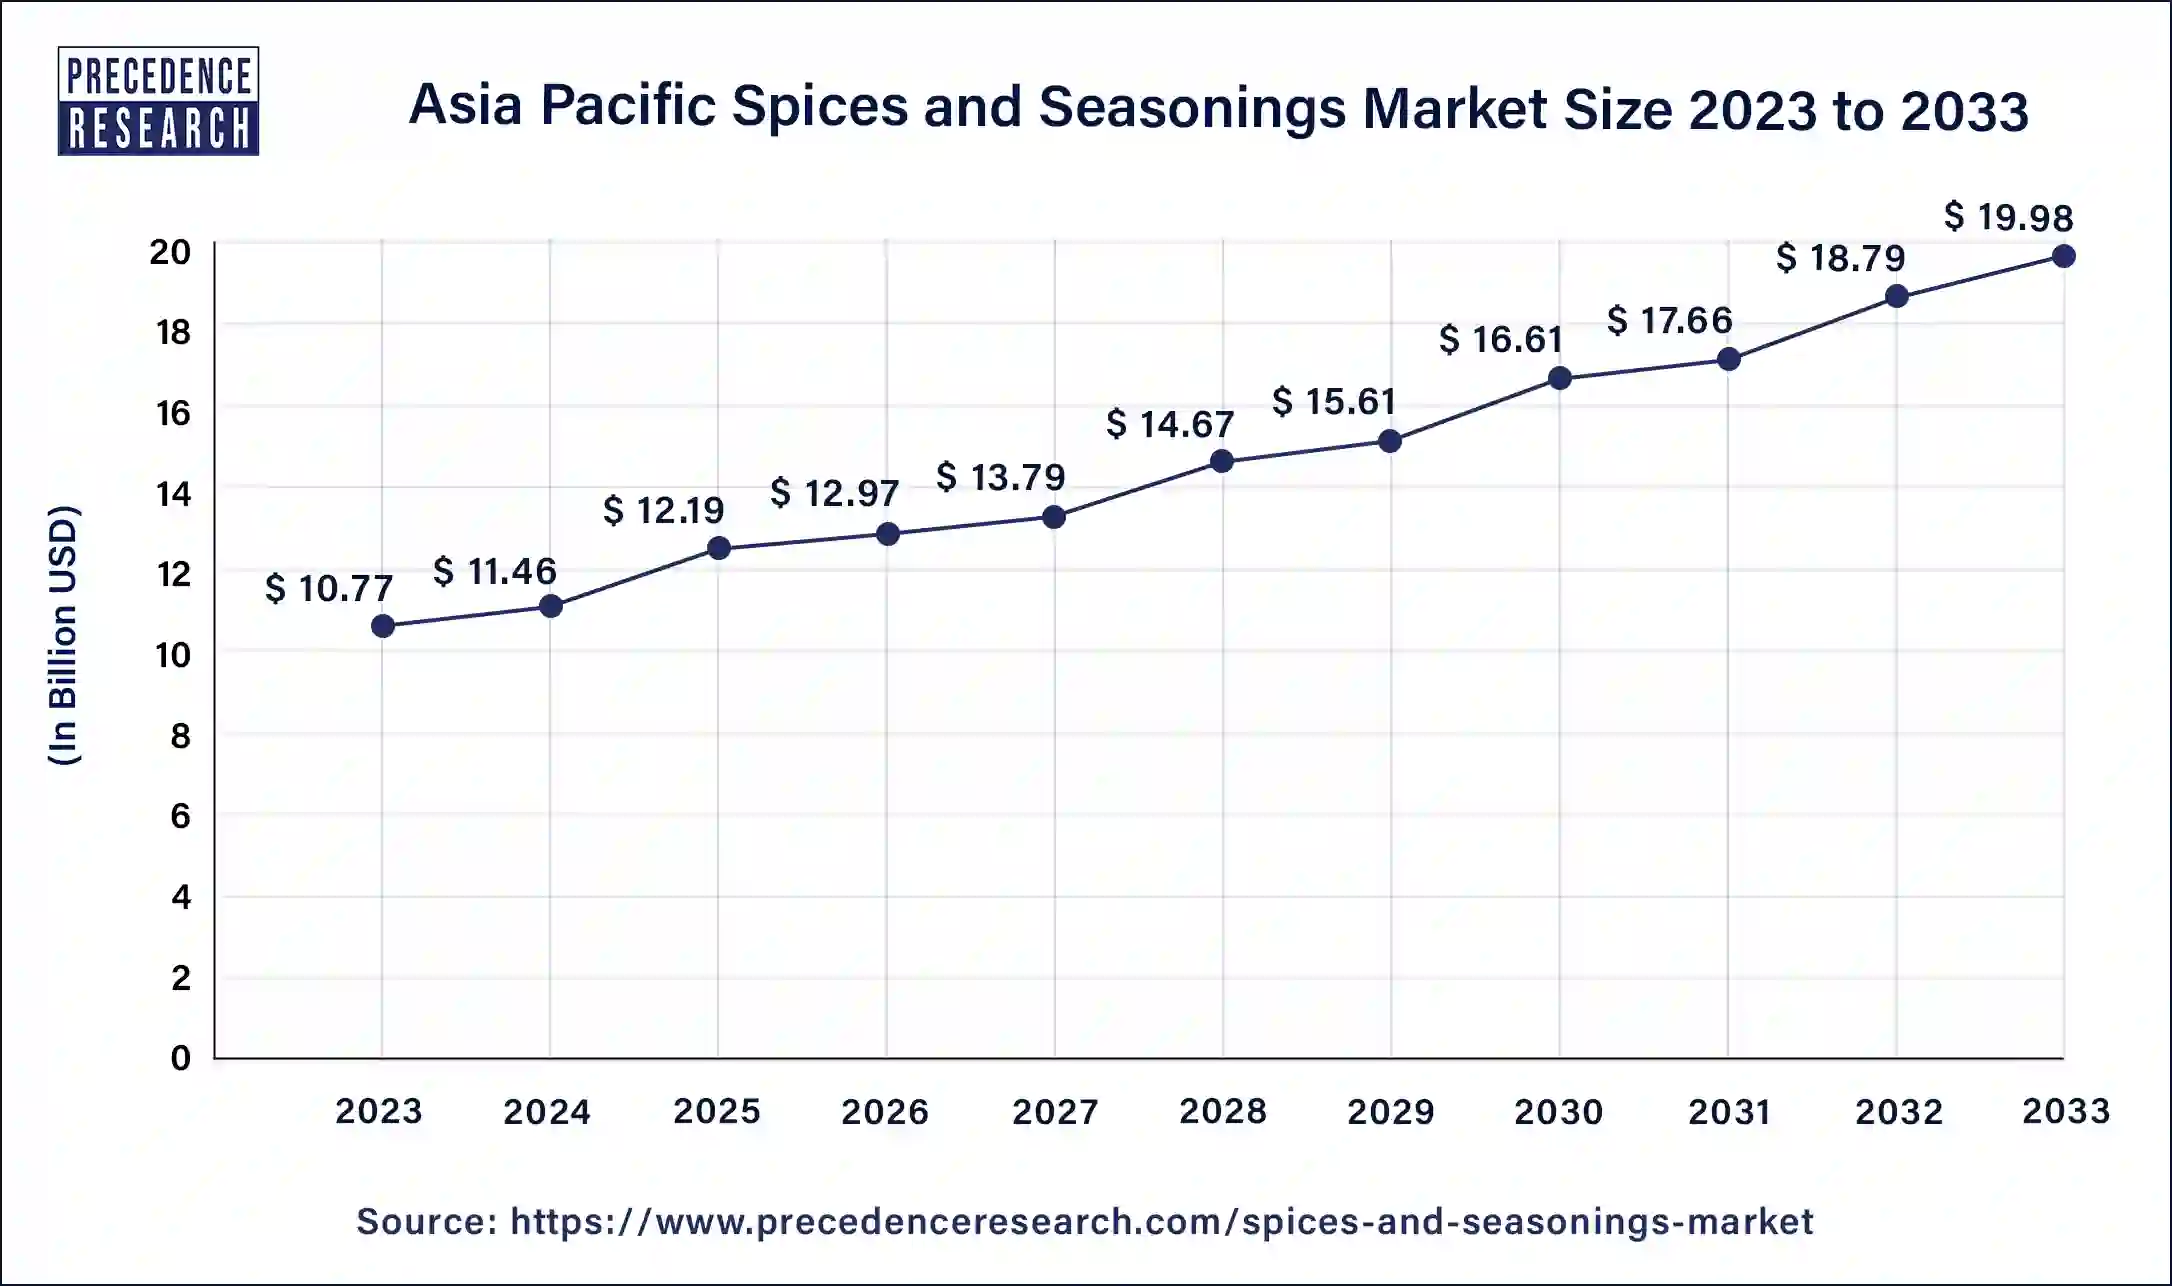 Asia Pacific Spices and Seasonings Market Size 2024 to 2033